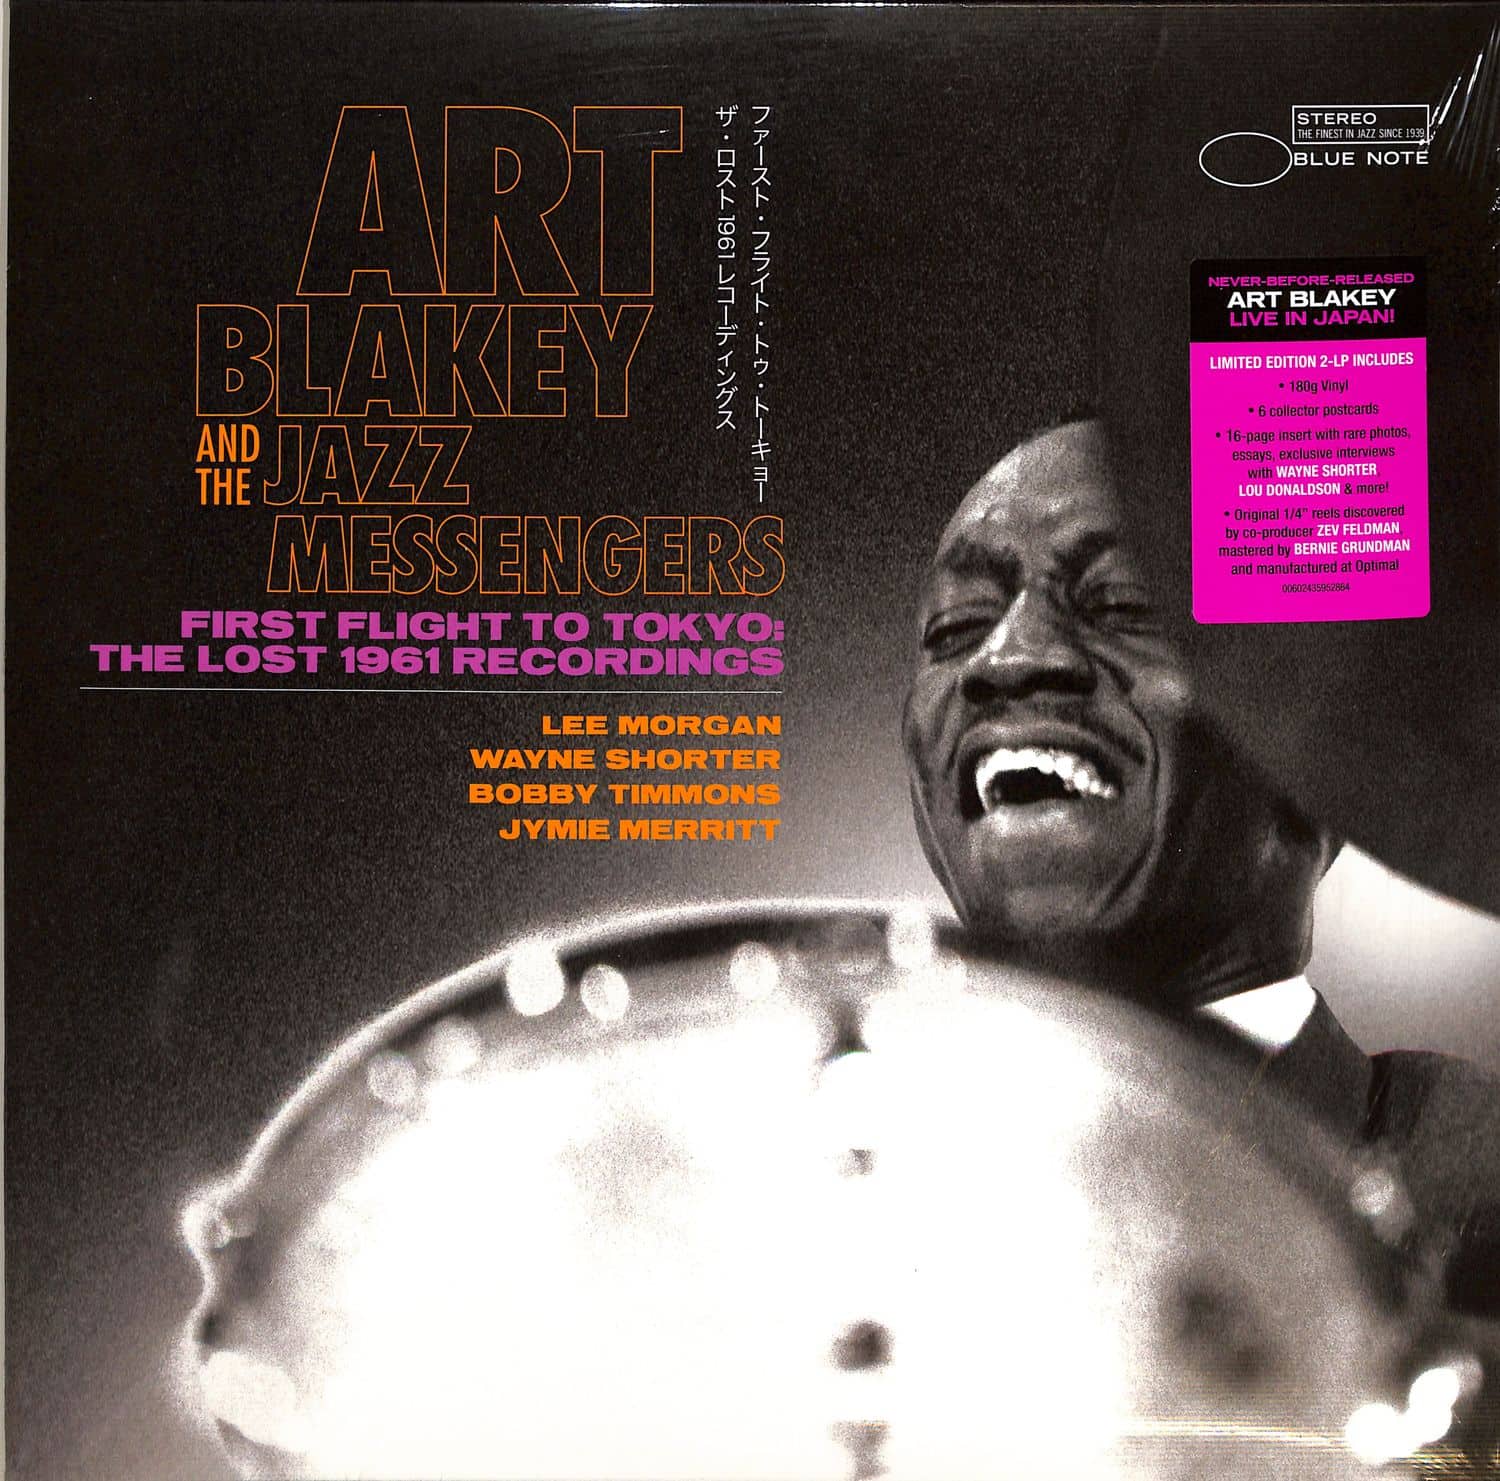 Art Blakey & The Jazz Messengers - FIRST FLIGHT TO TOKYO: THE LOST 1961 RECORDINGS 